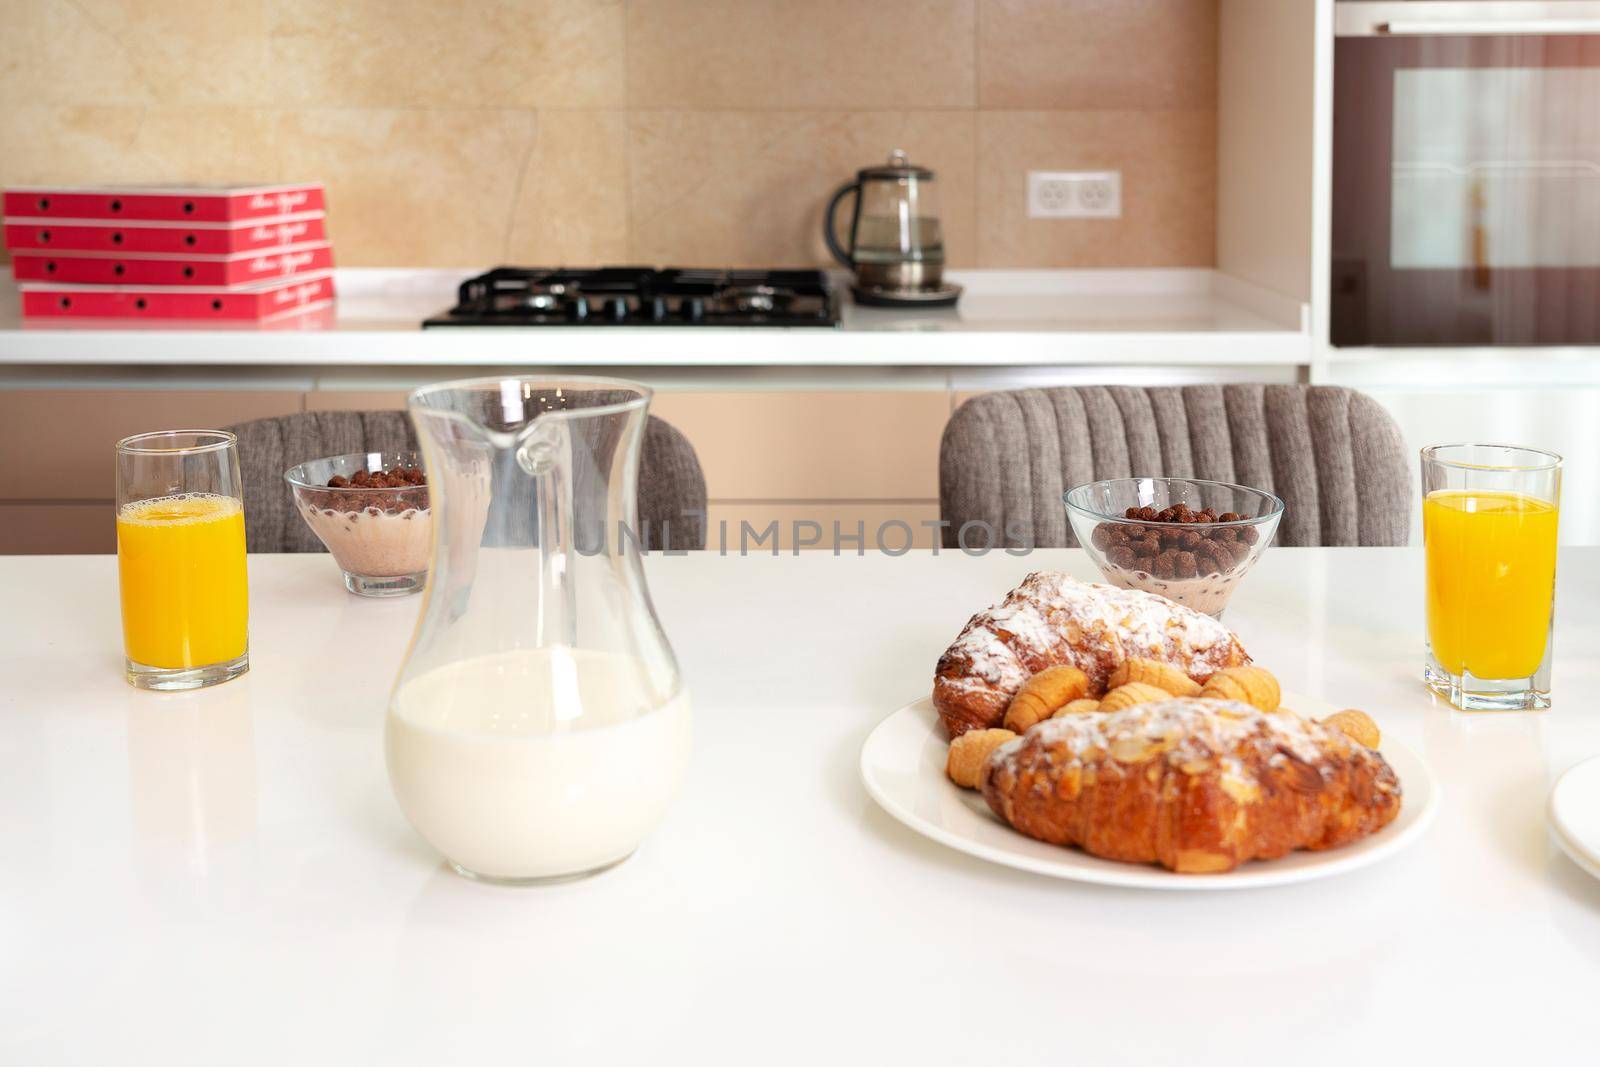 Breakfast is ready on the table in kitchen, Croissant, juice and milk